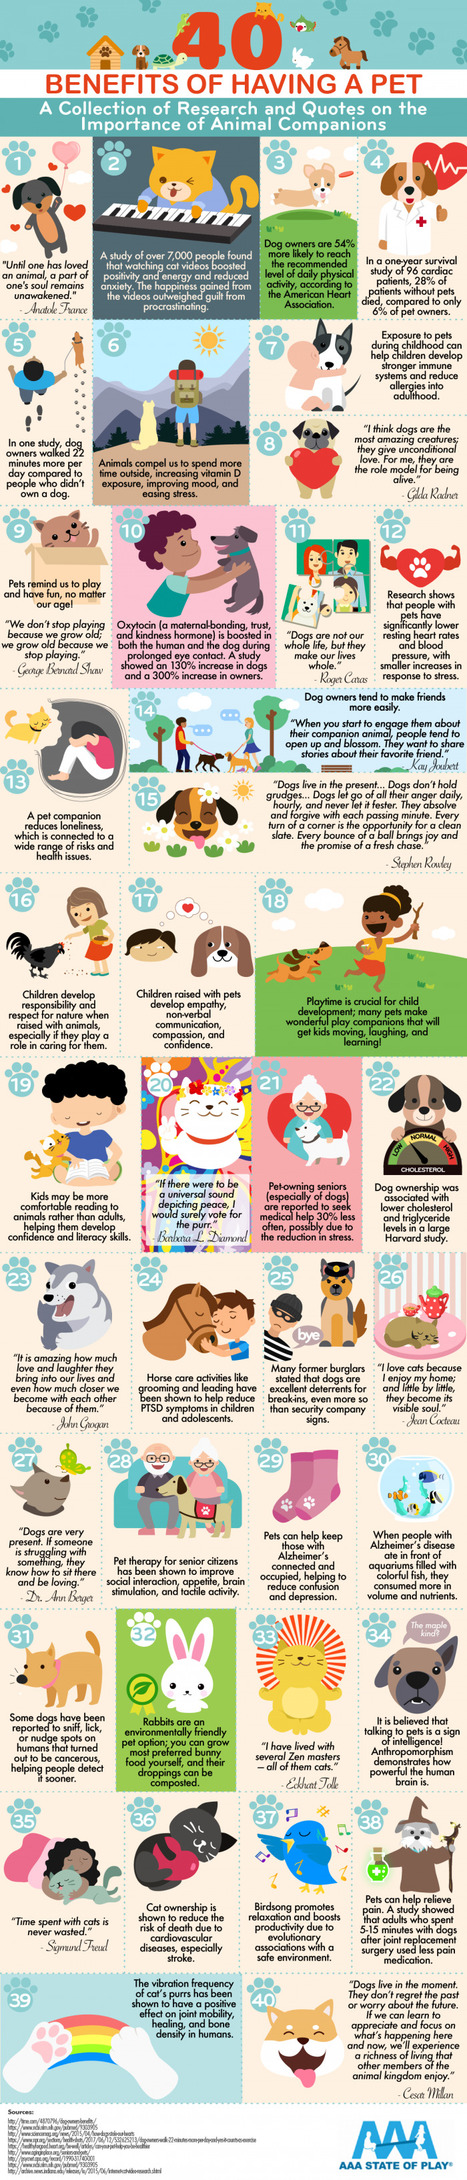 40 Benefits Of Owning Pets - Infographic | Professional Learning for Busy Educators | Scoop.it